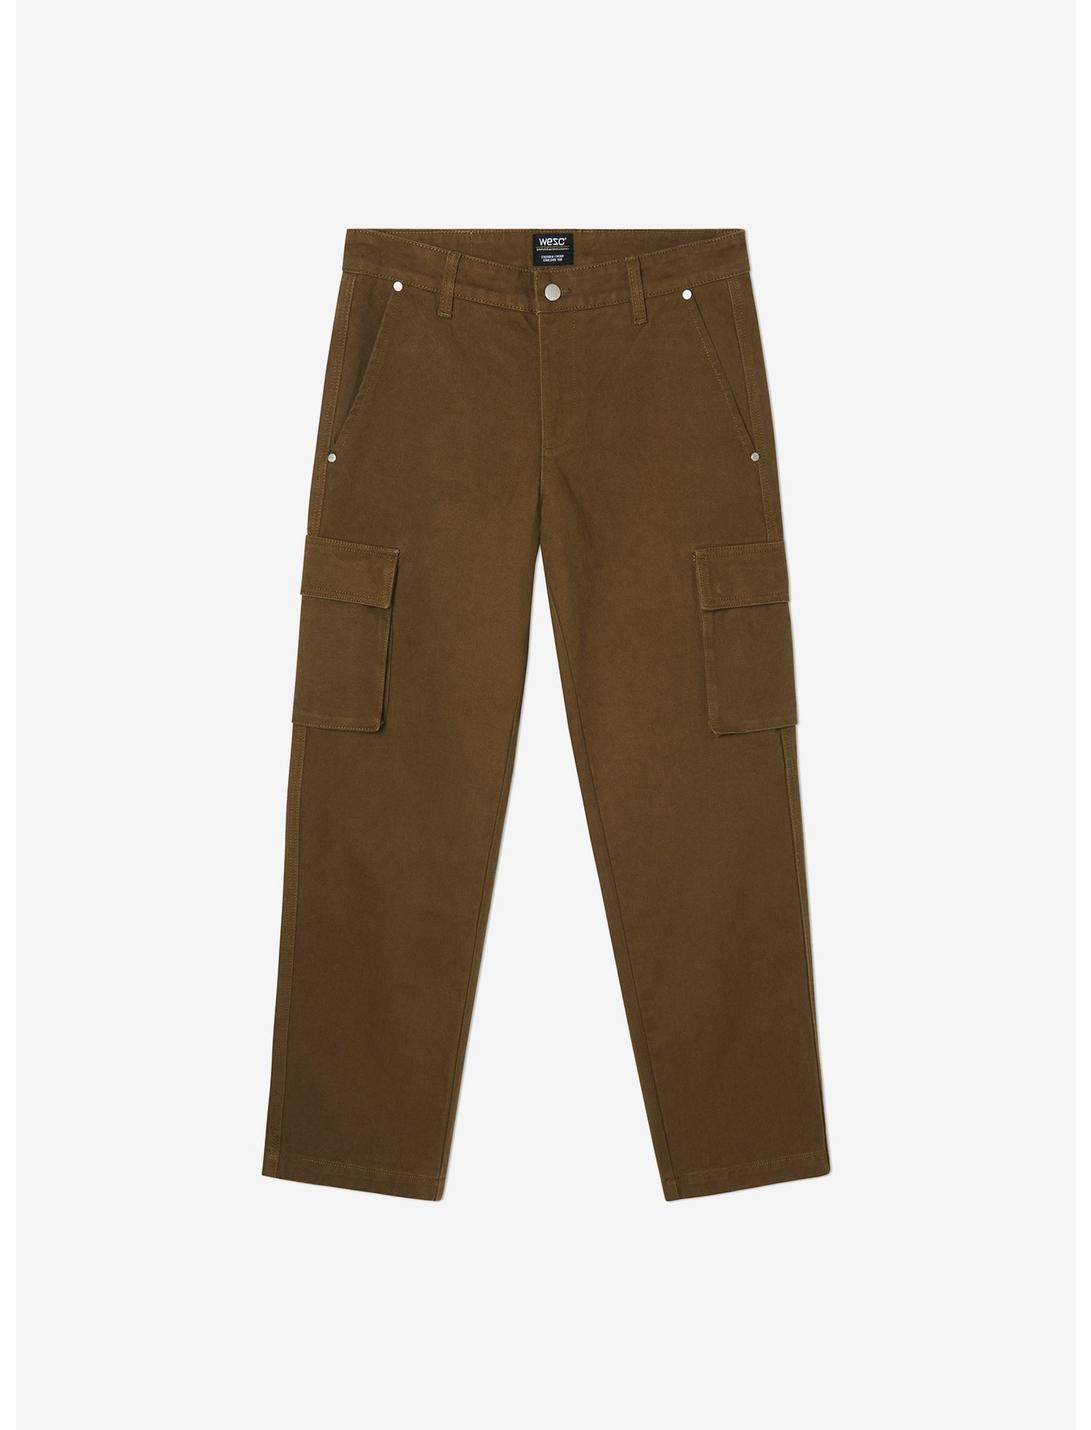 WeSC Relax Fit Cargo Pants Olive, OLIVE, hi-res